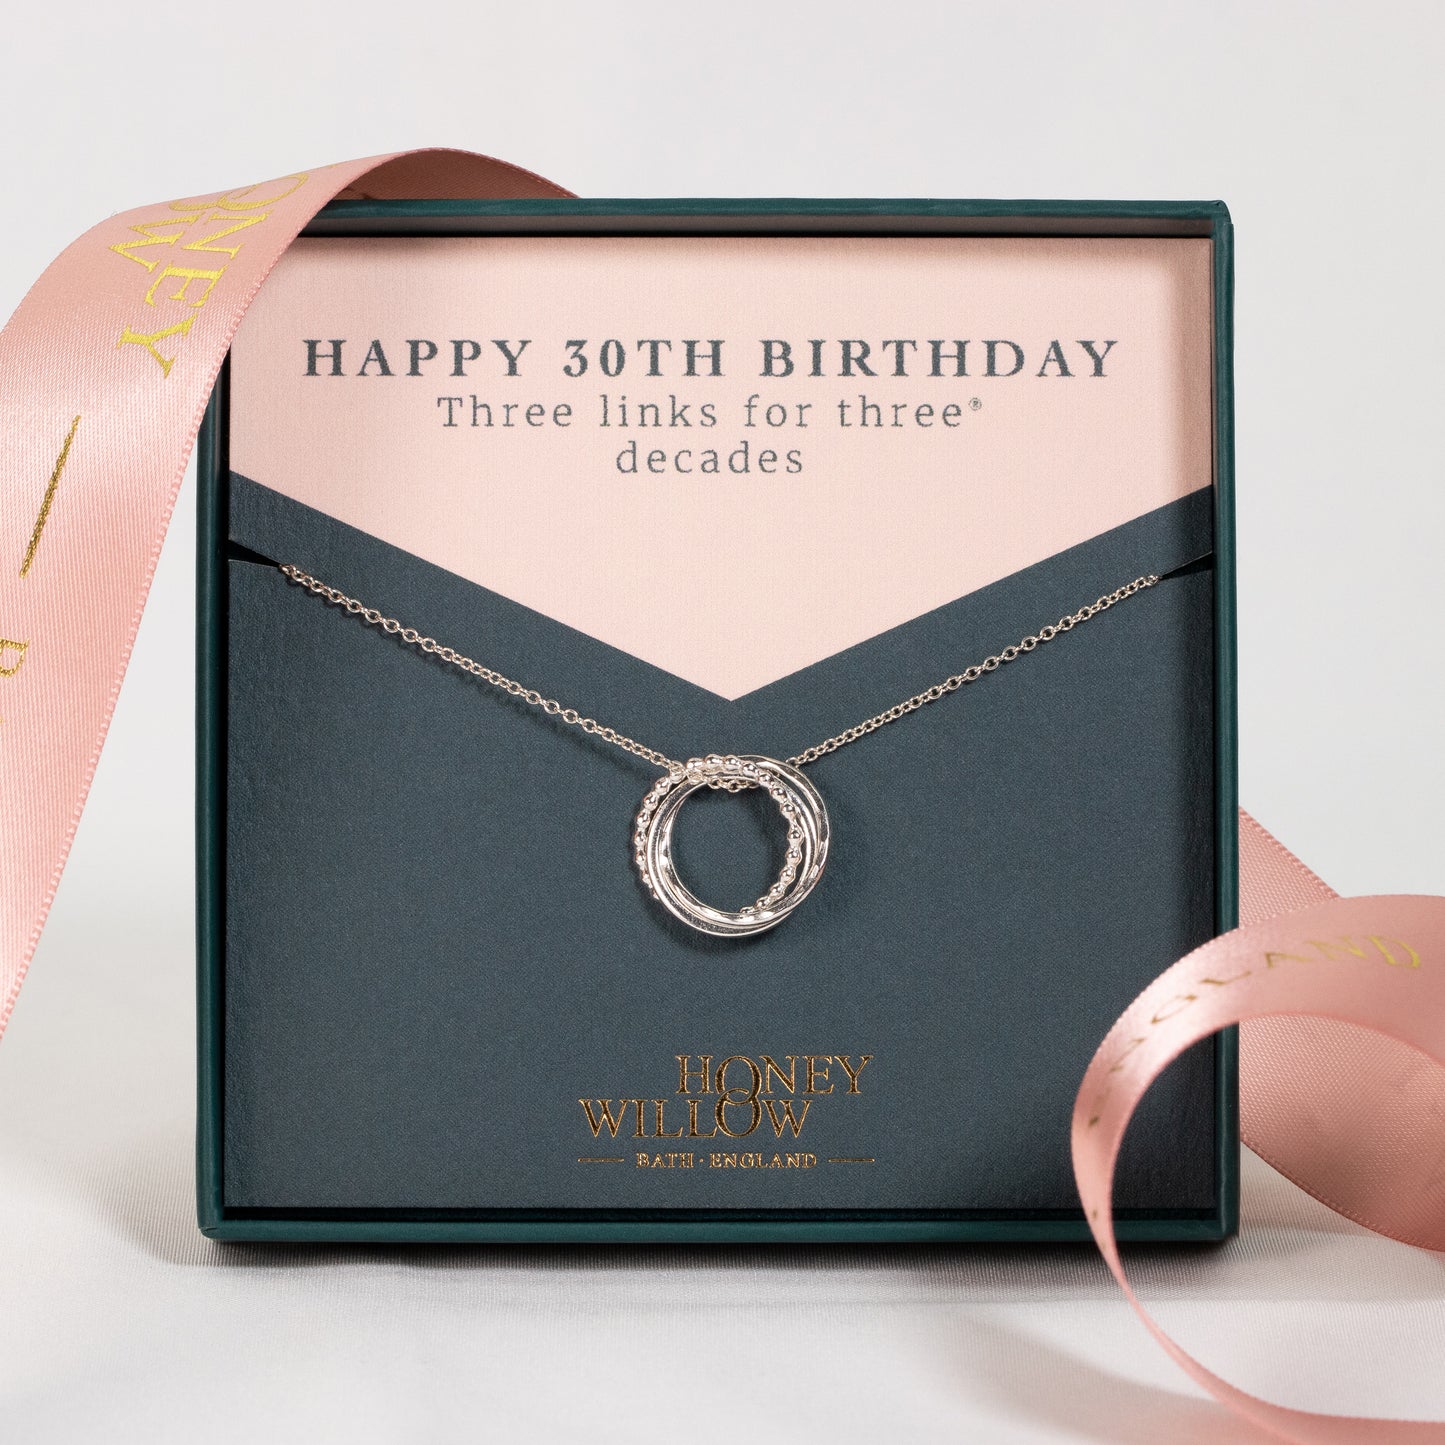 30th Birthday Necklace - The Original 3 Links for 3 Decades Necklace - Petite Silver